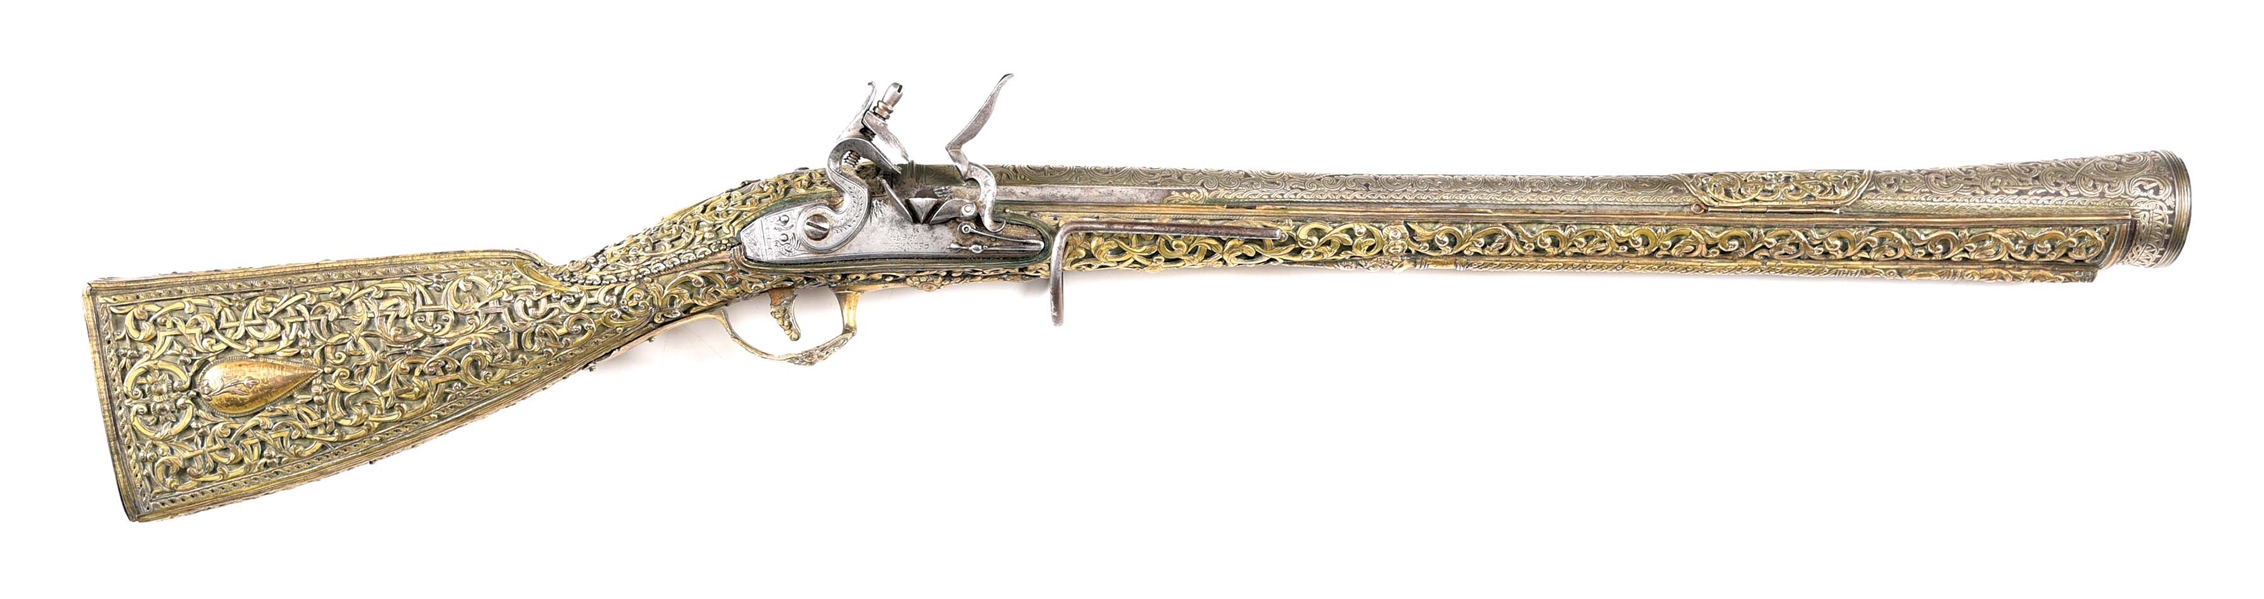 (A) A VERY SHOWY OTTOMAN BLUNDERBUSS WITH GILDED SILVER STOCK, OF THE KIND GIVEN TO MIDDLE EASTERN SULTANS.